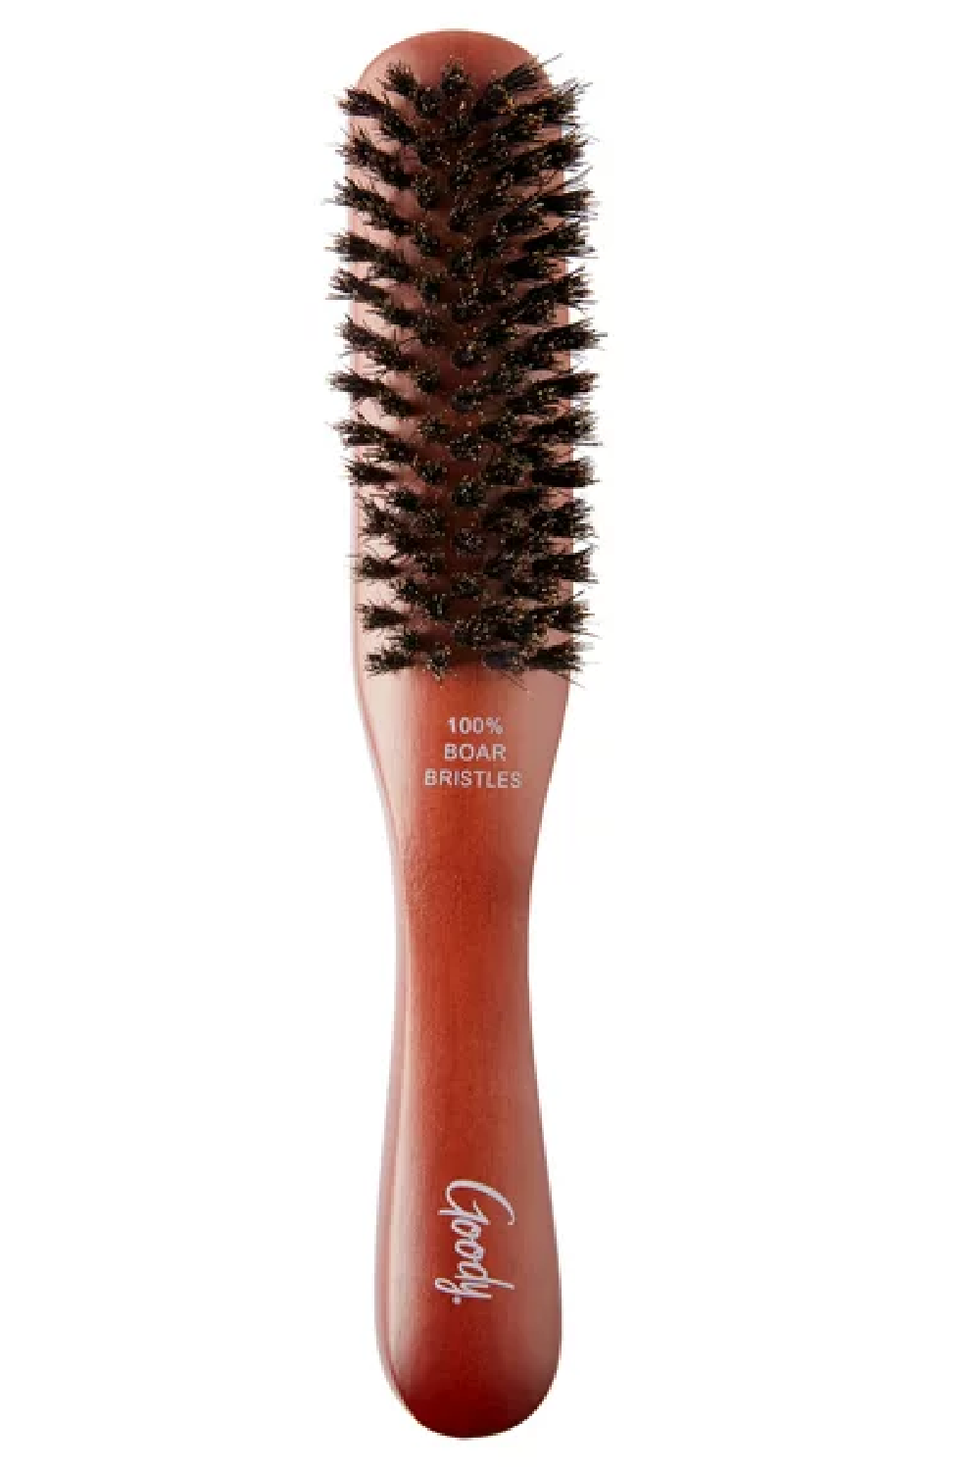 Refined Boar-Bristle Brush from The Longhairs